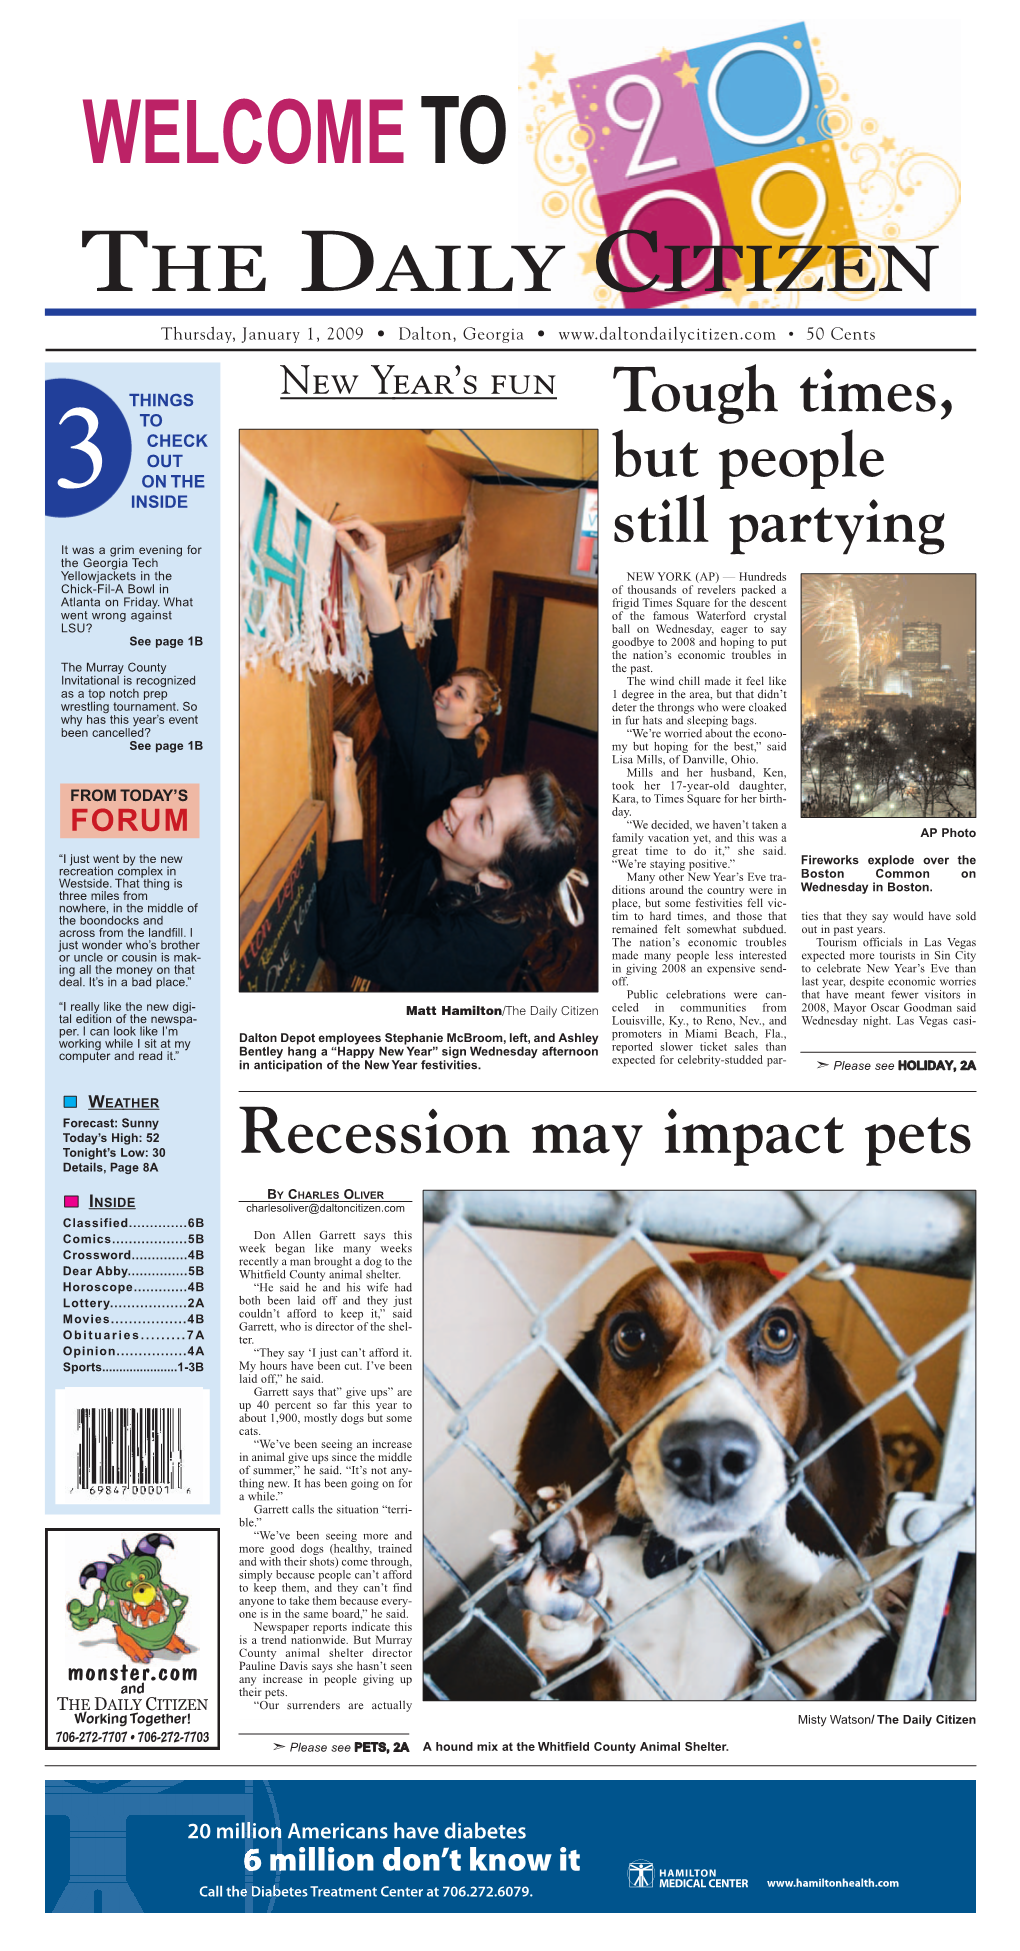 THE DAILY CITIZEN Recession May Impact Pets